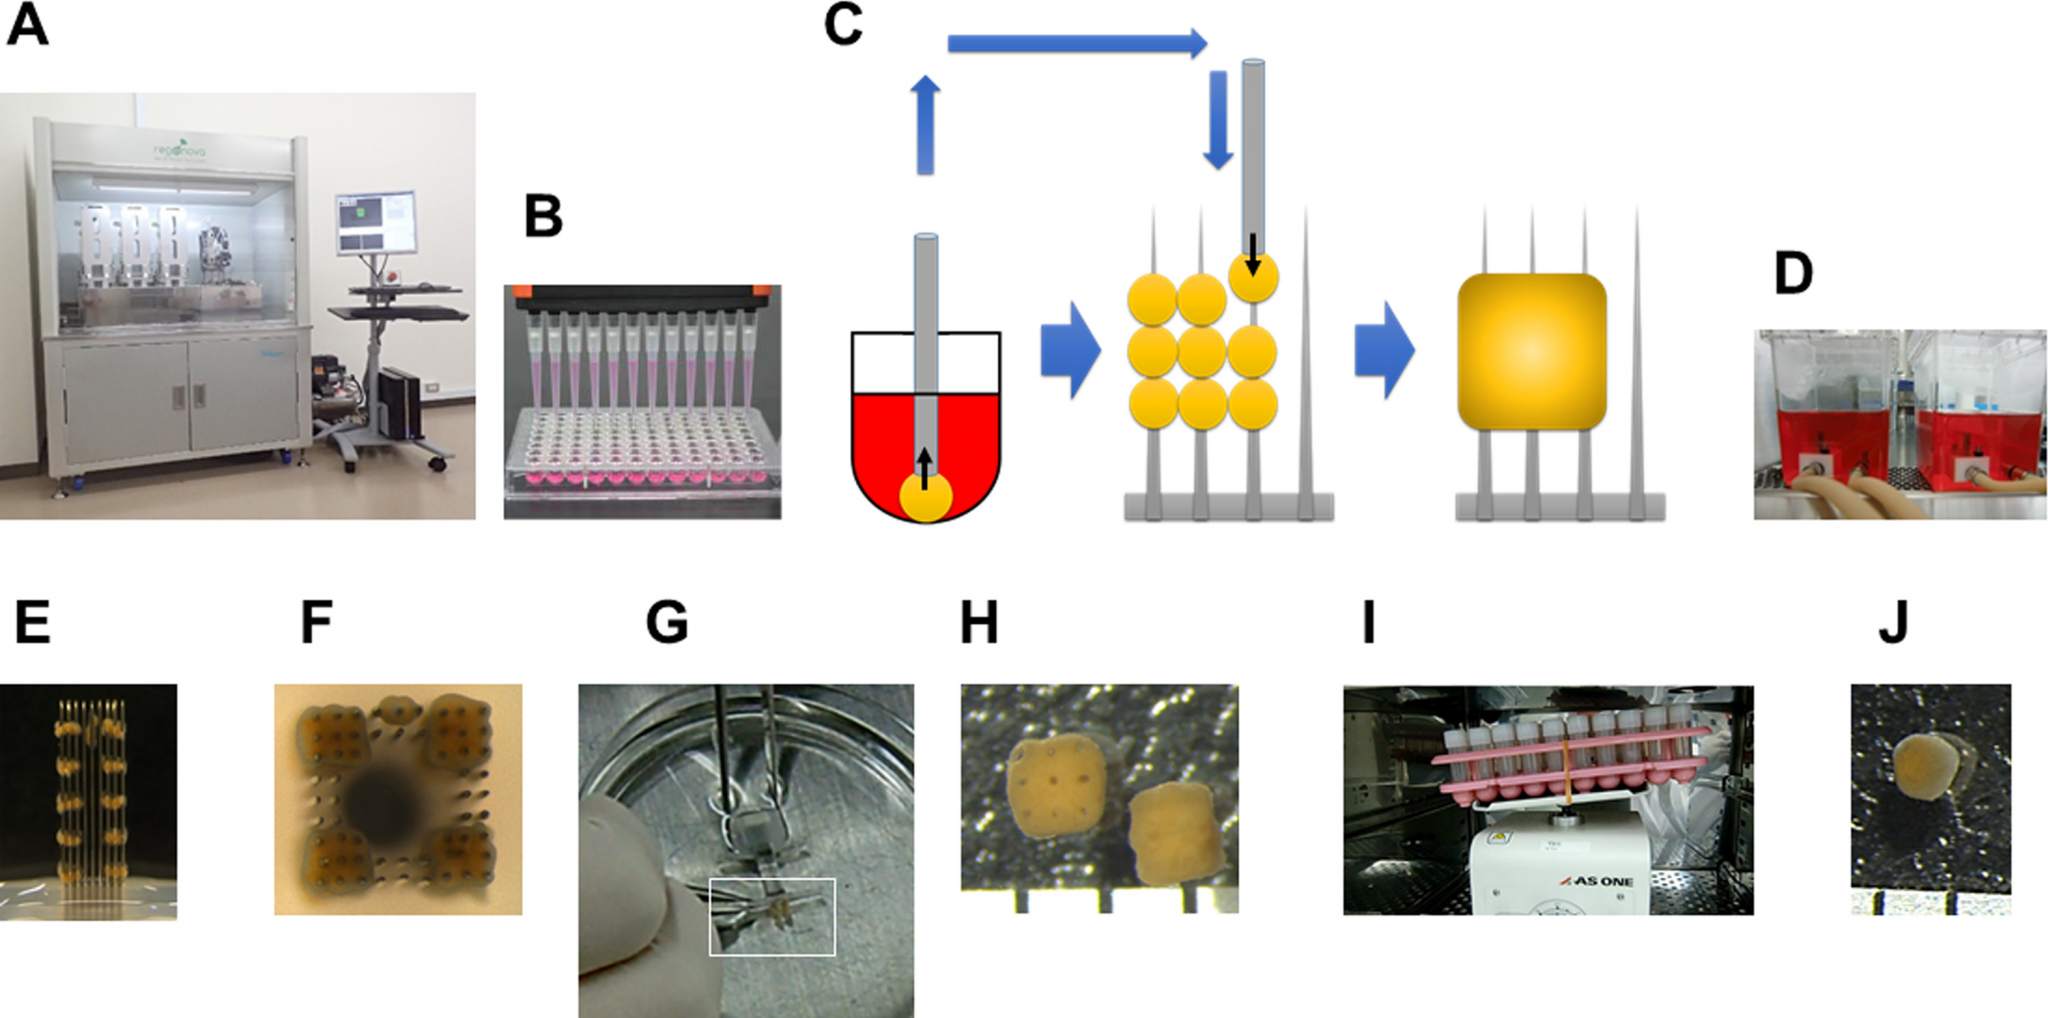 Figure 1 from the paper shows the 3D printing method which uses skewers (C) as supporting structure which are later removed. Image via Biochemistry and Biophysics Reports.